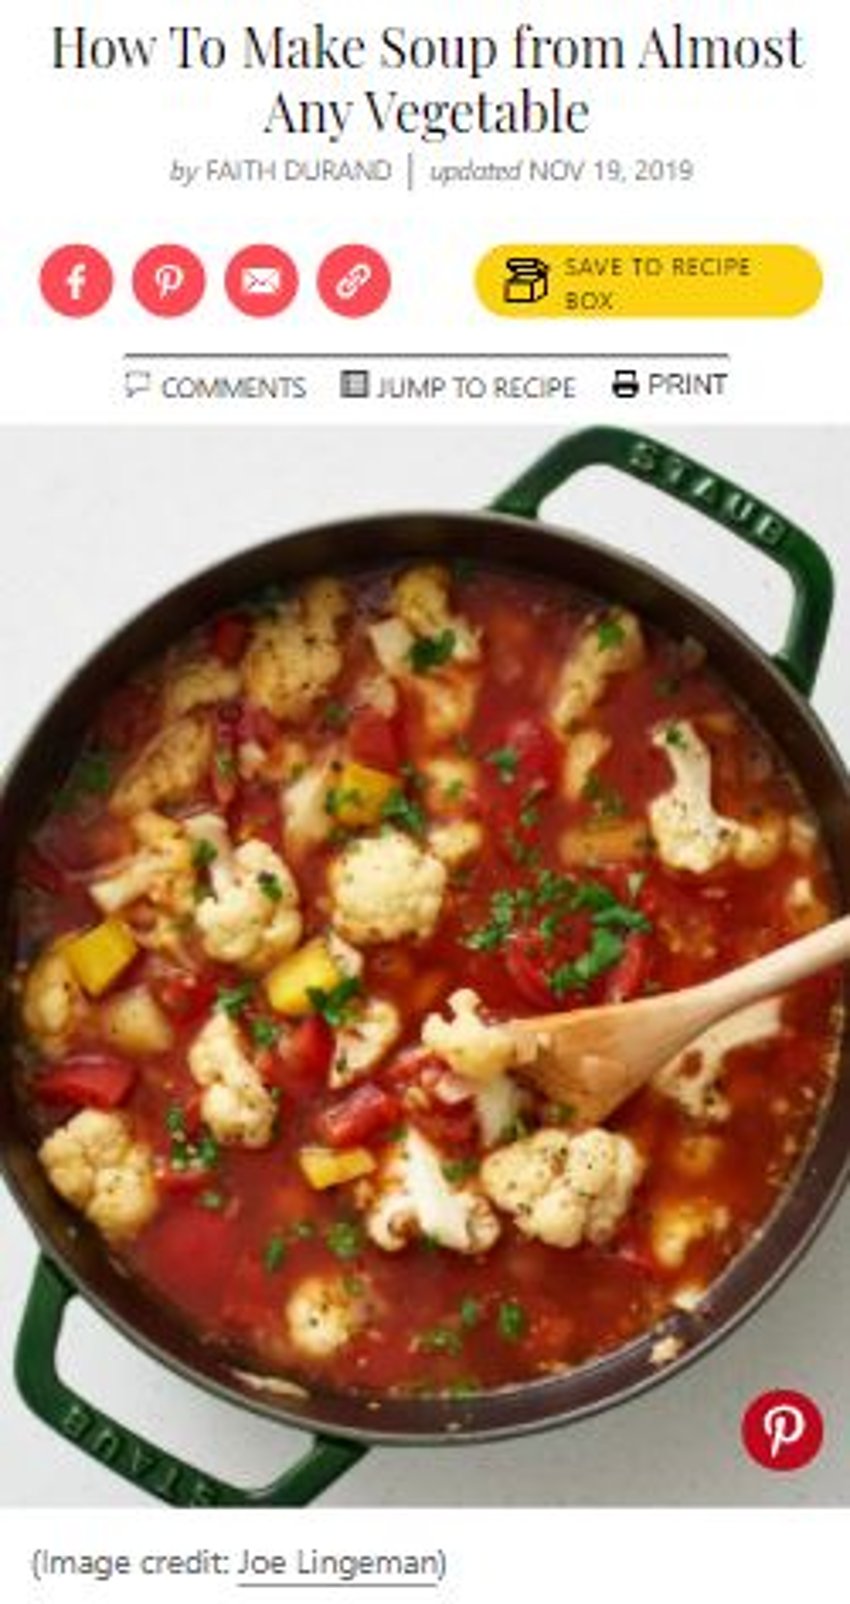 check out the full post [here](https://www.thekitchn.com/how-to-make-soup-from-almost-any-vegetable-cooking-lessons-from-the-kitchn-35301)